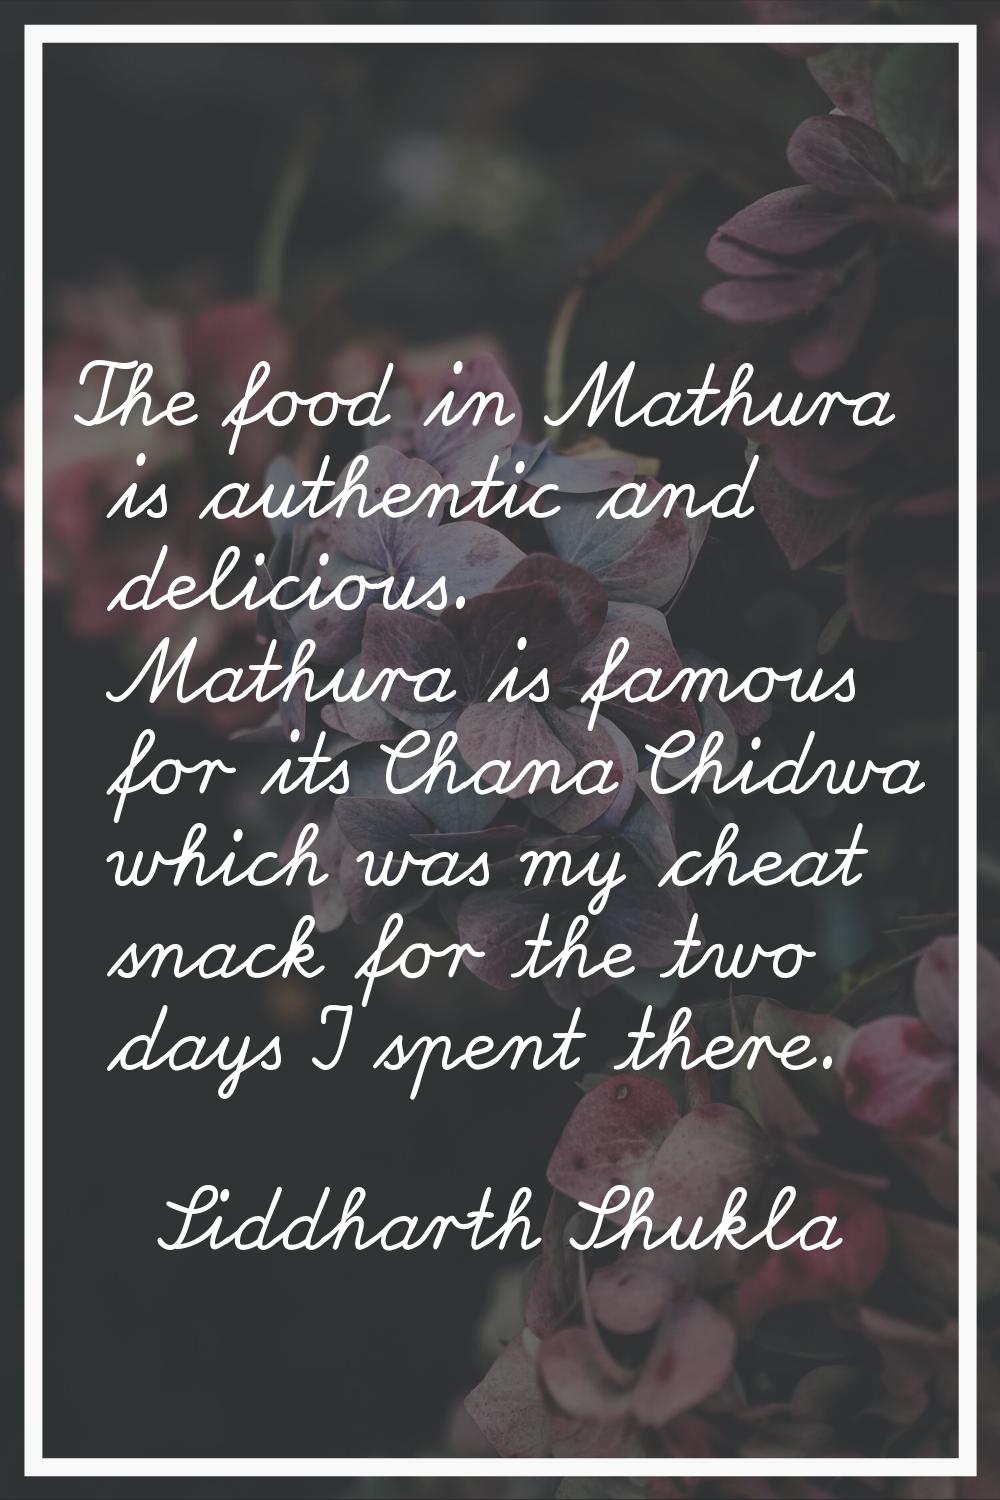 The food in Mathura is authentic and delicious. Mathura is famous for its Chana Chidwa which was my